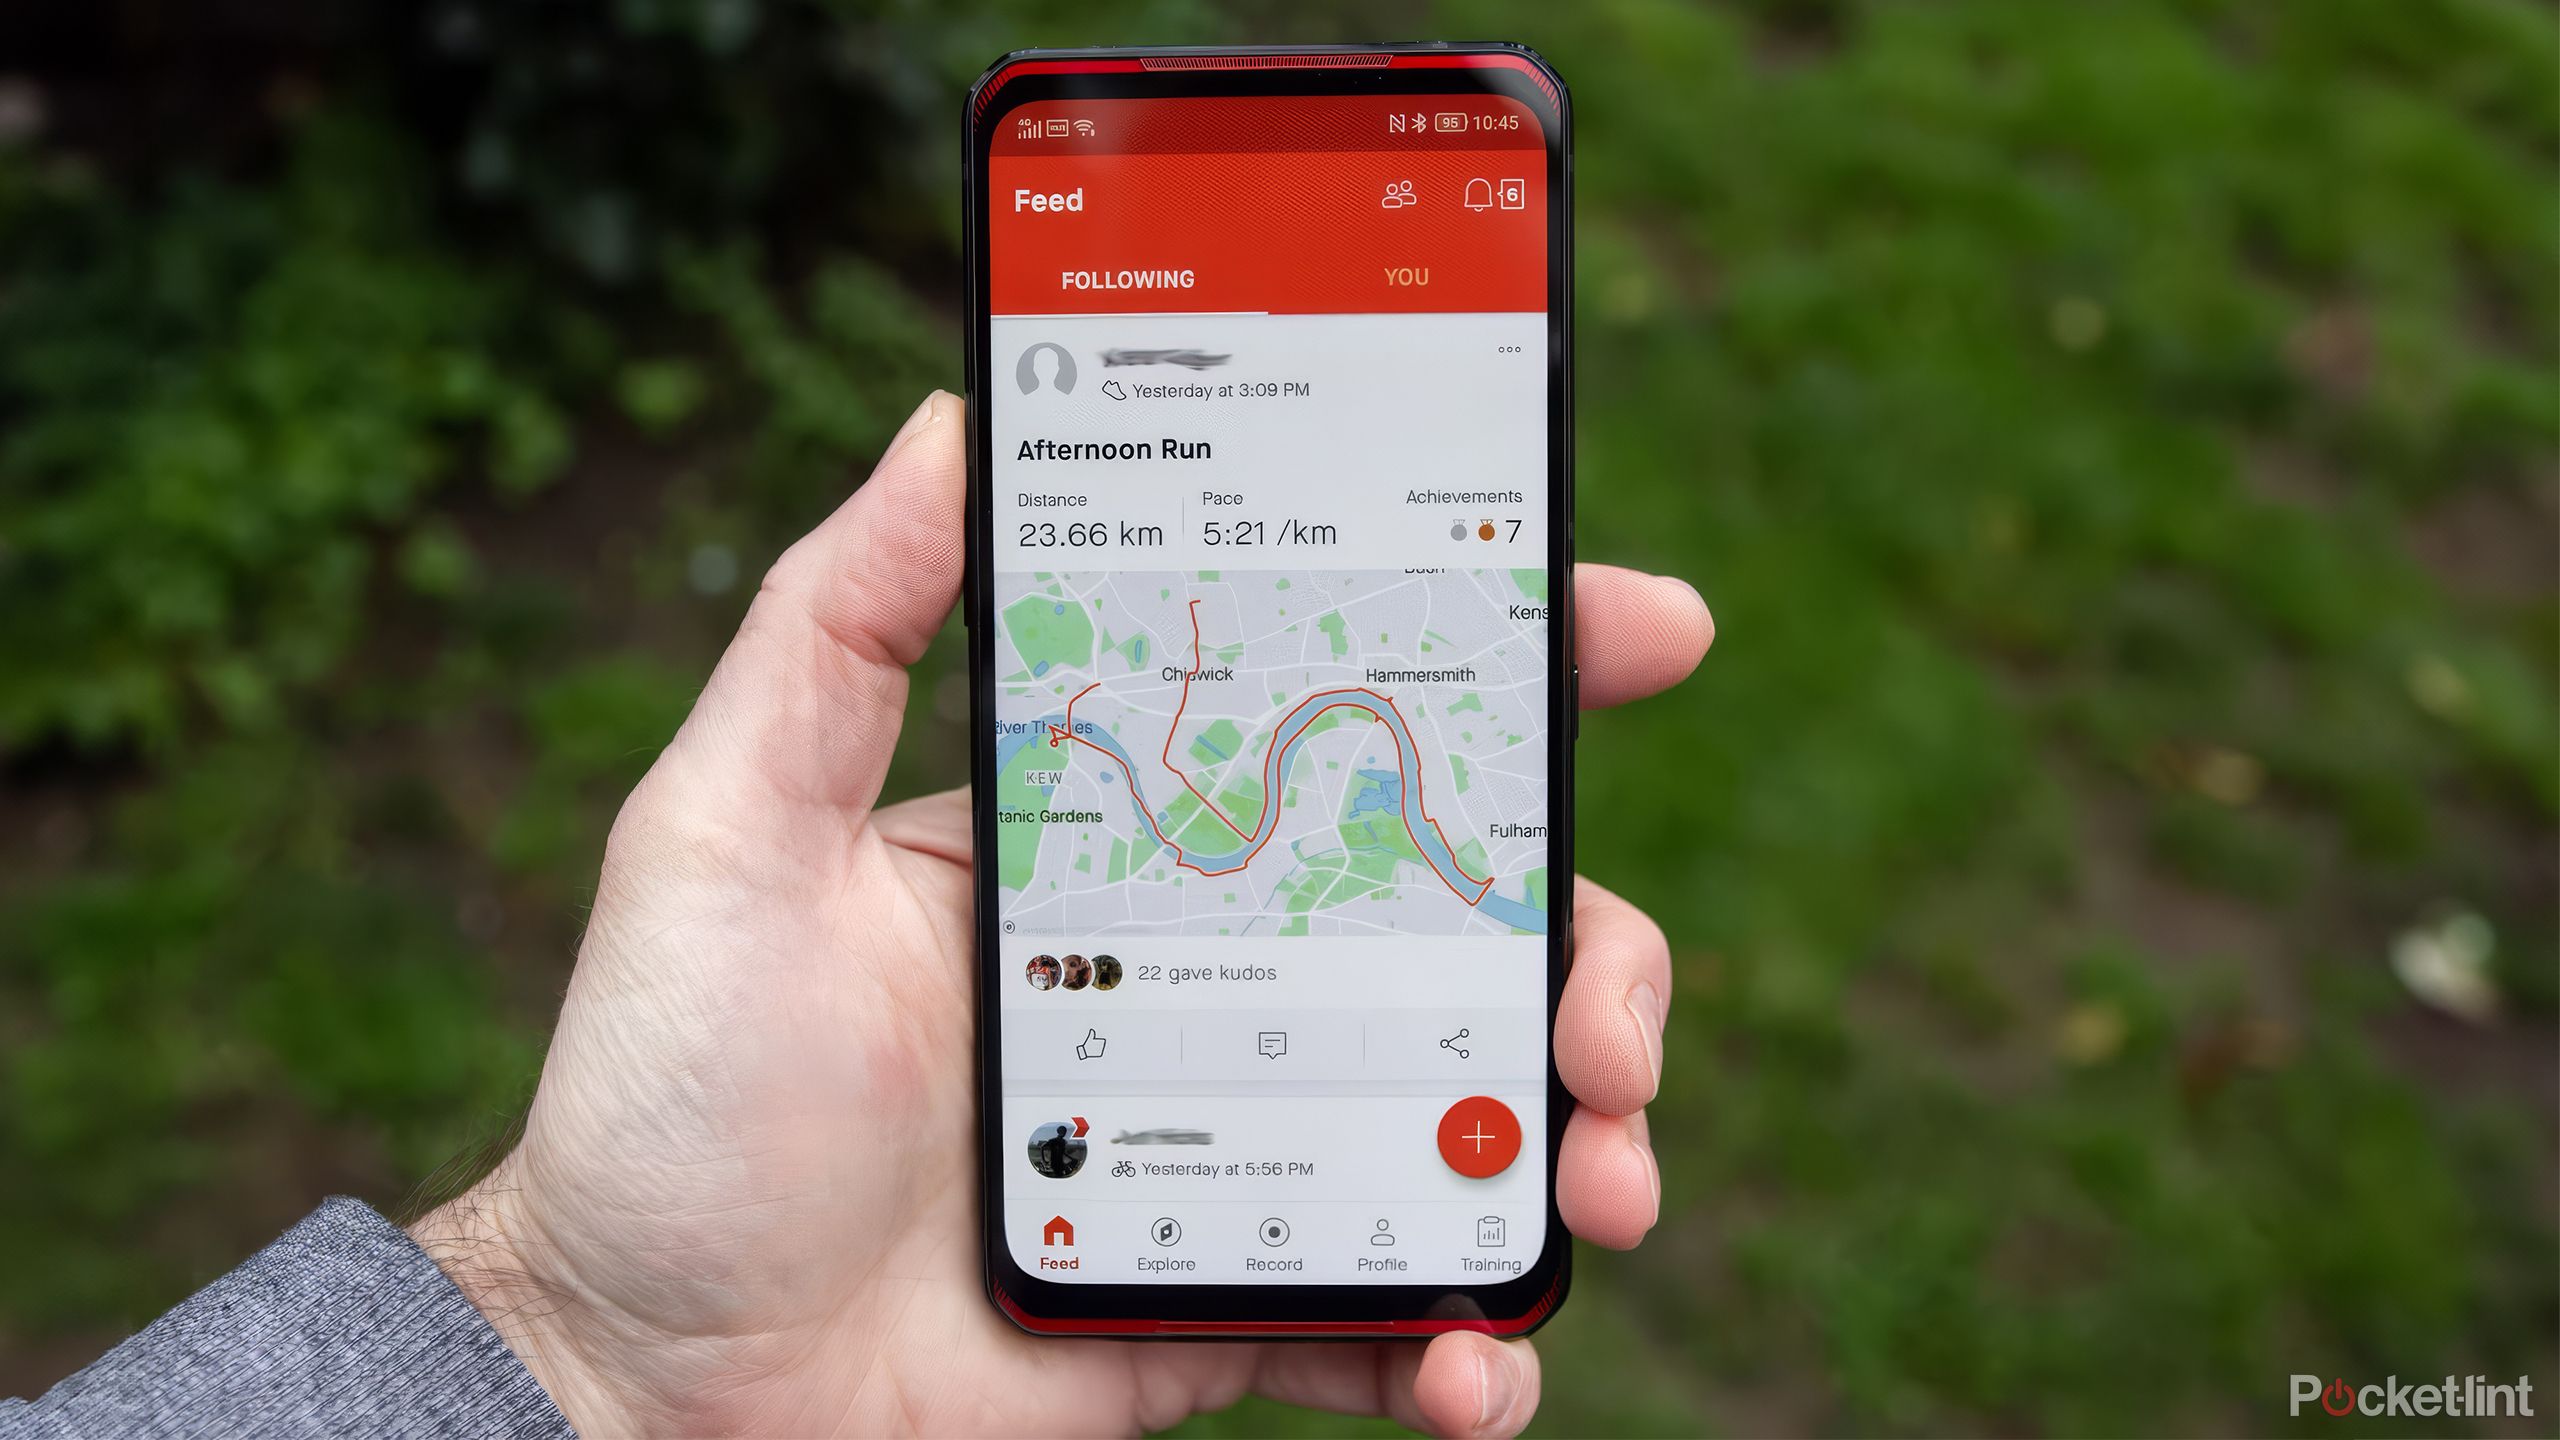 A hand holds a phone with the Strava app displayed against a blurred grassy background. 